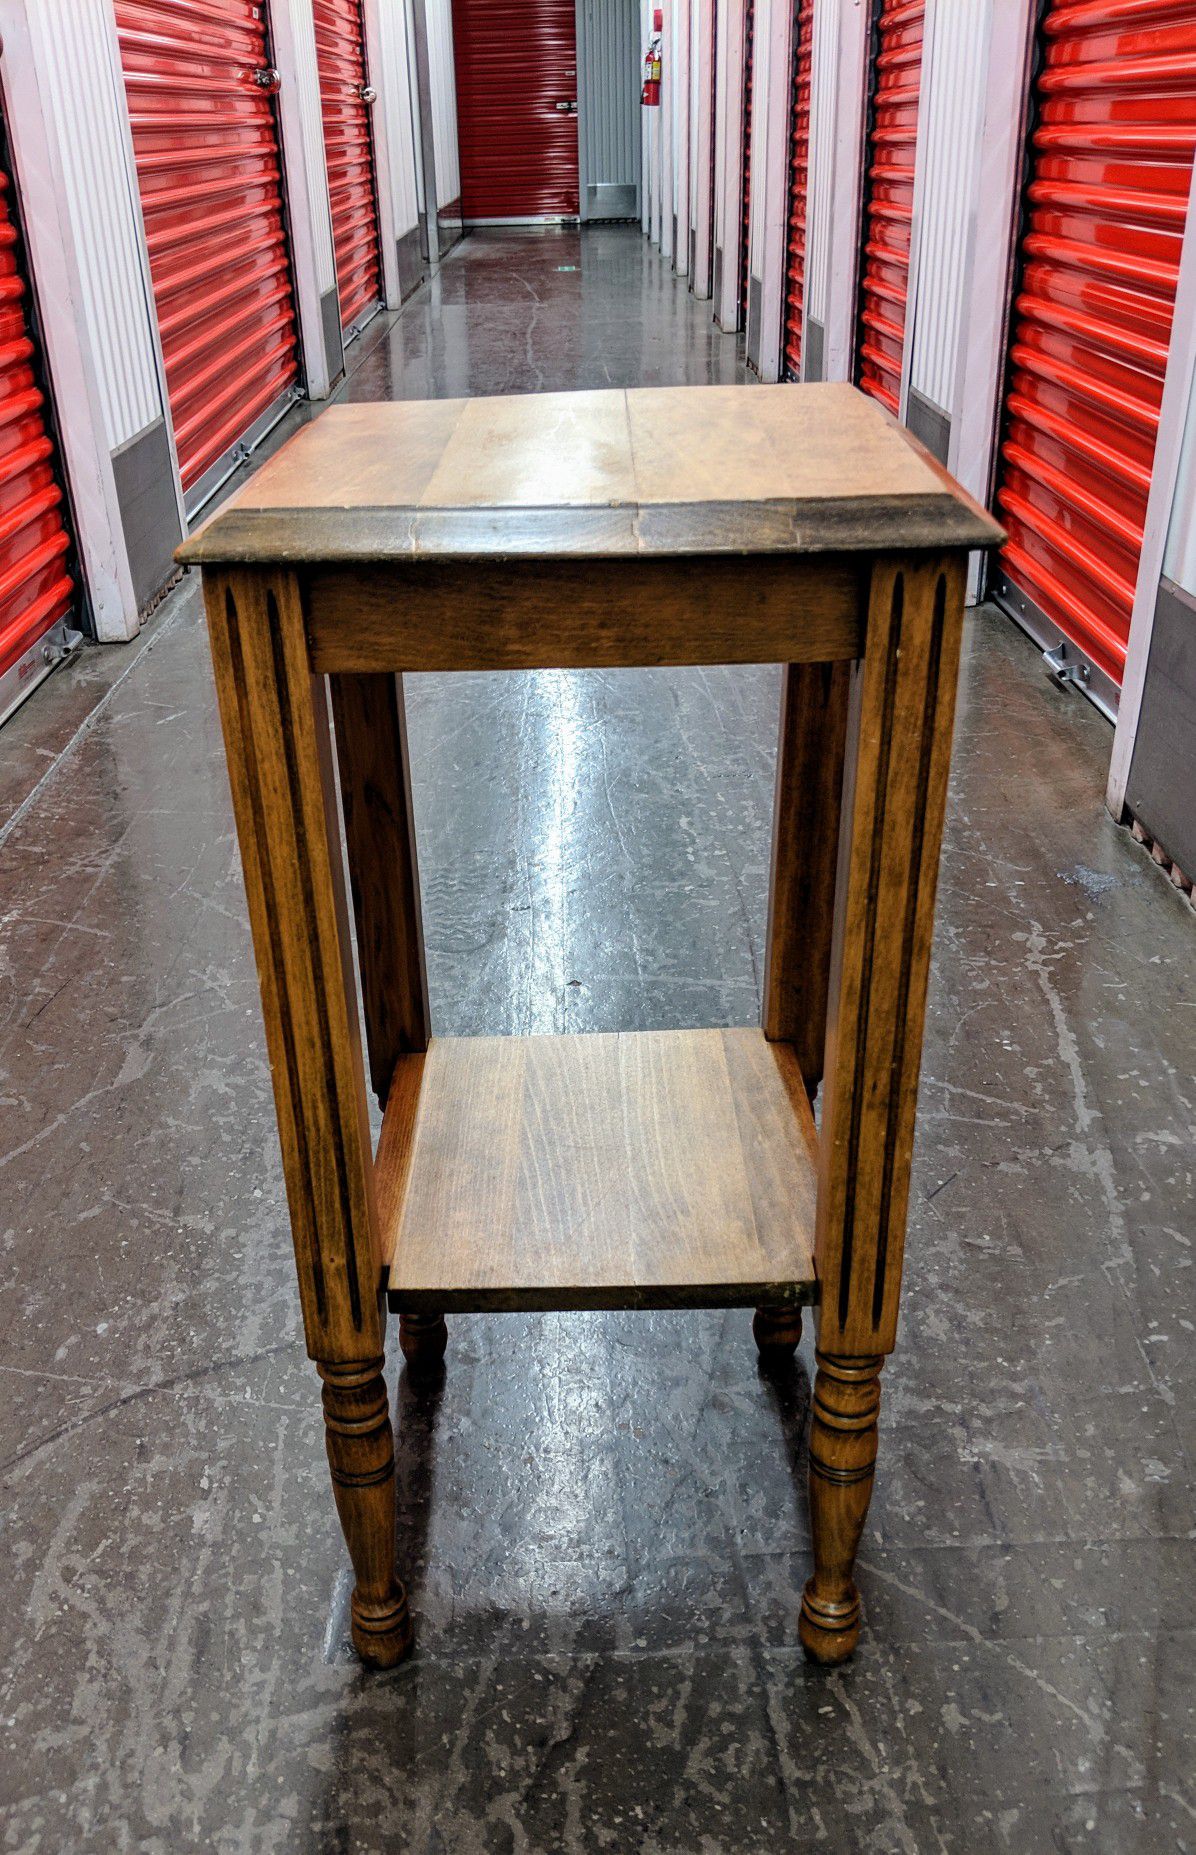 Vintage antique phone table, accent table, hall table in excellent condition.